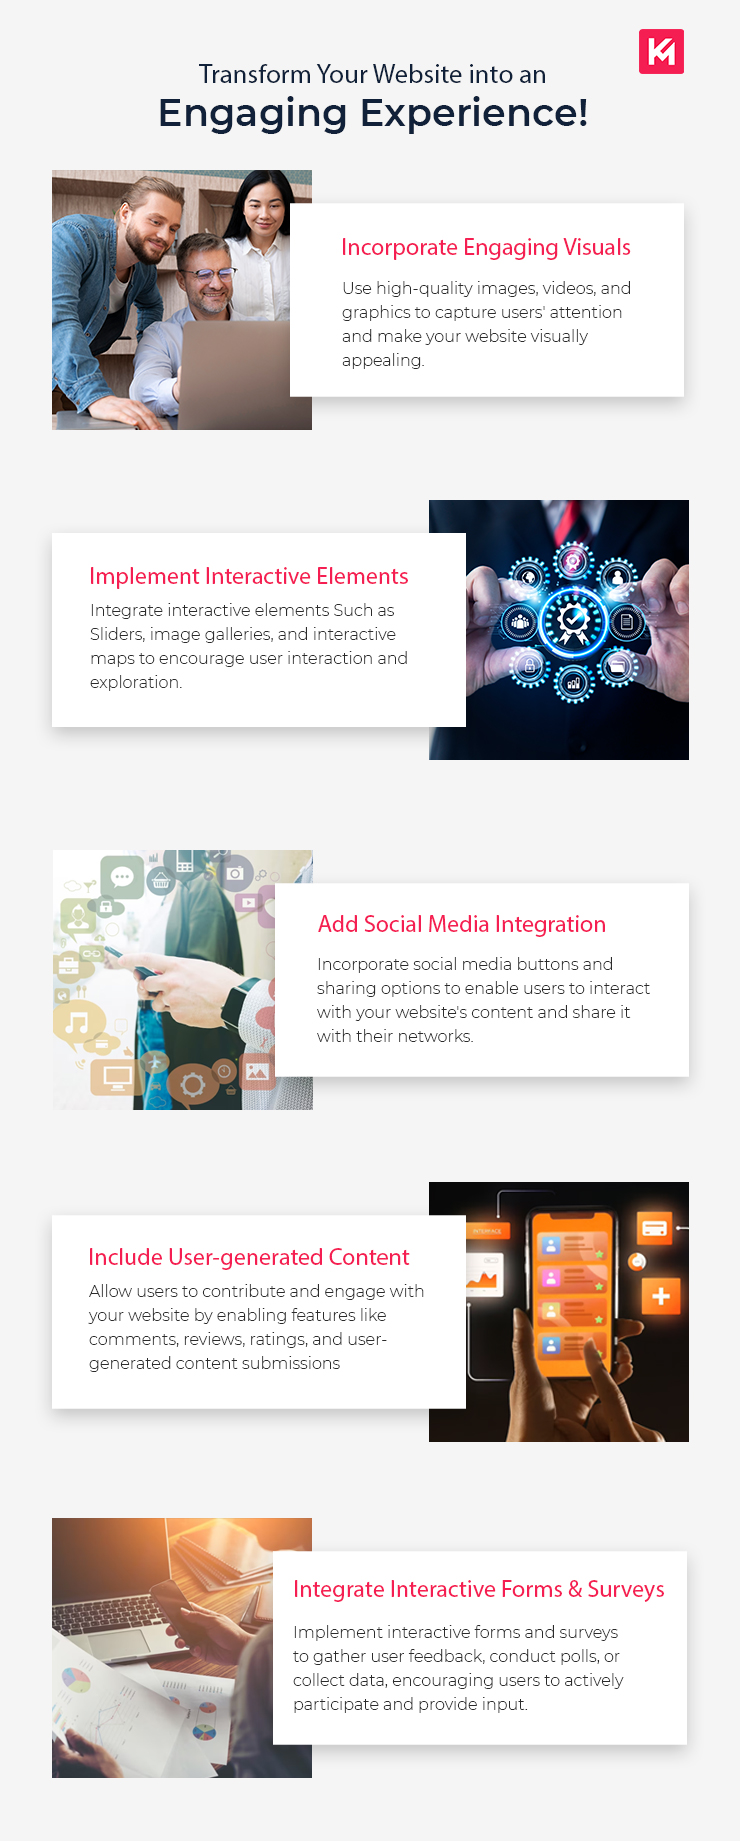 transform-your-website-into-an-engaging-experience